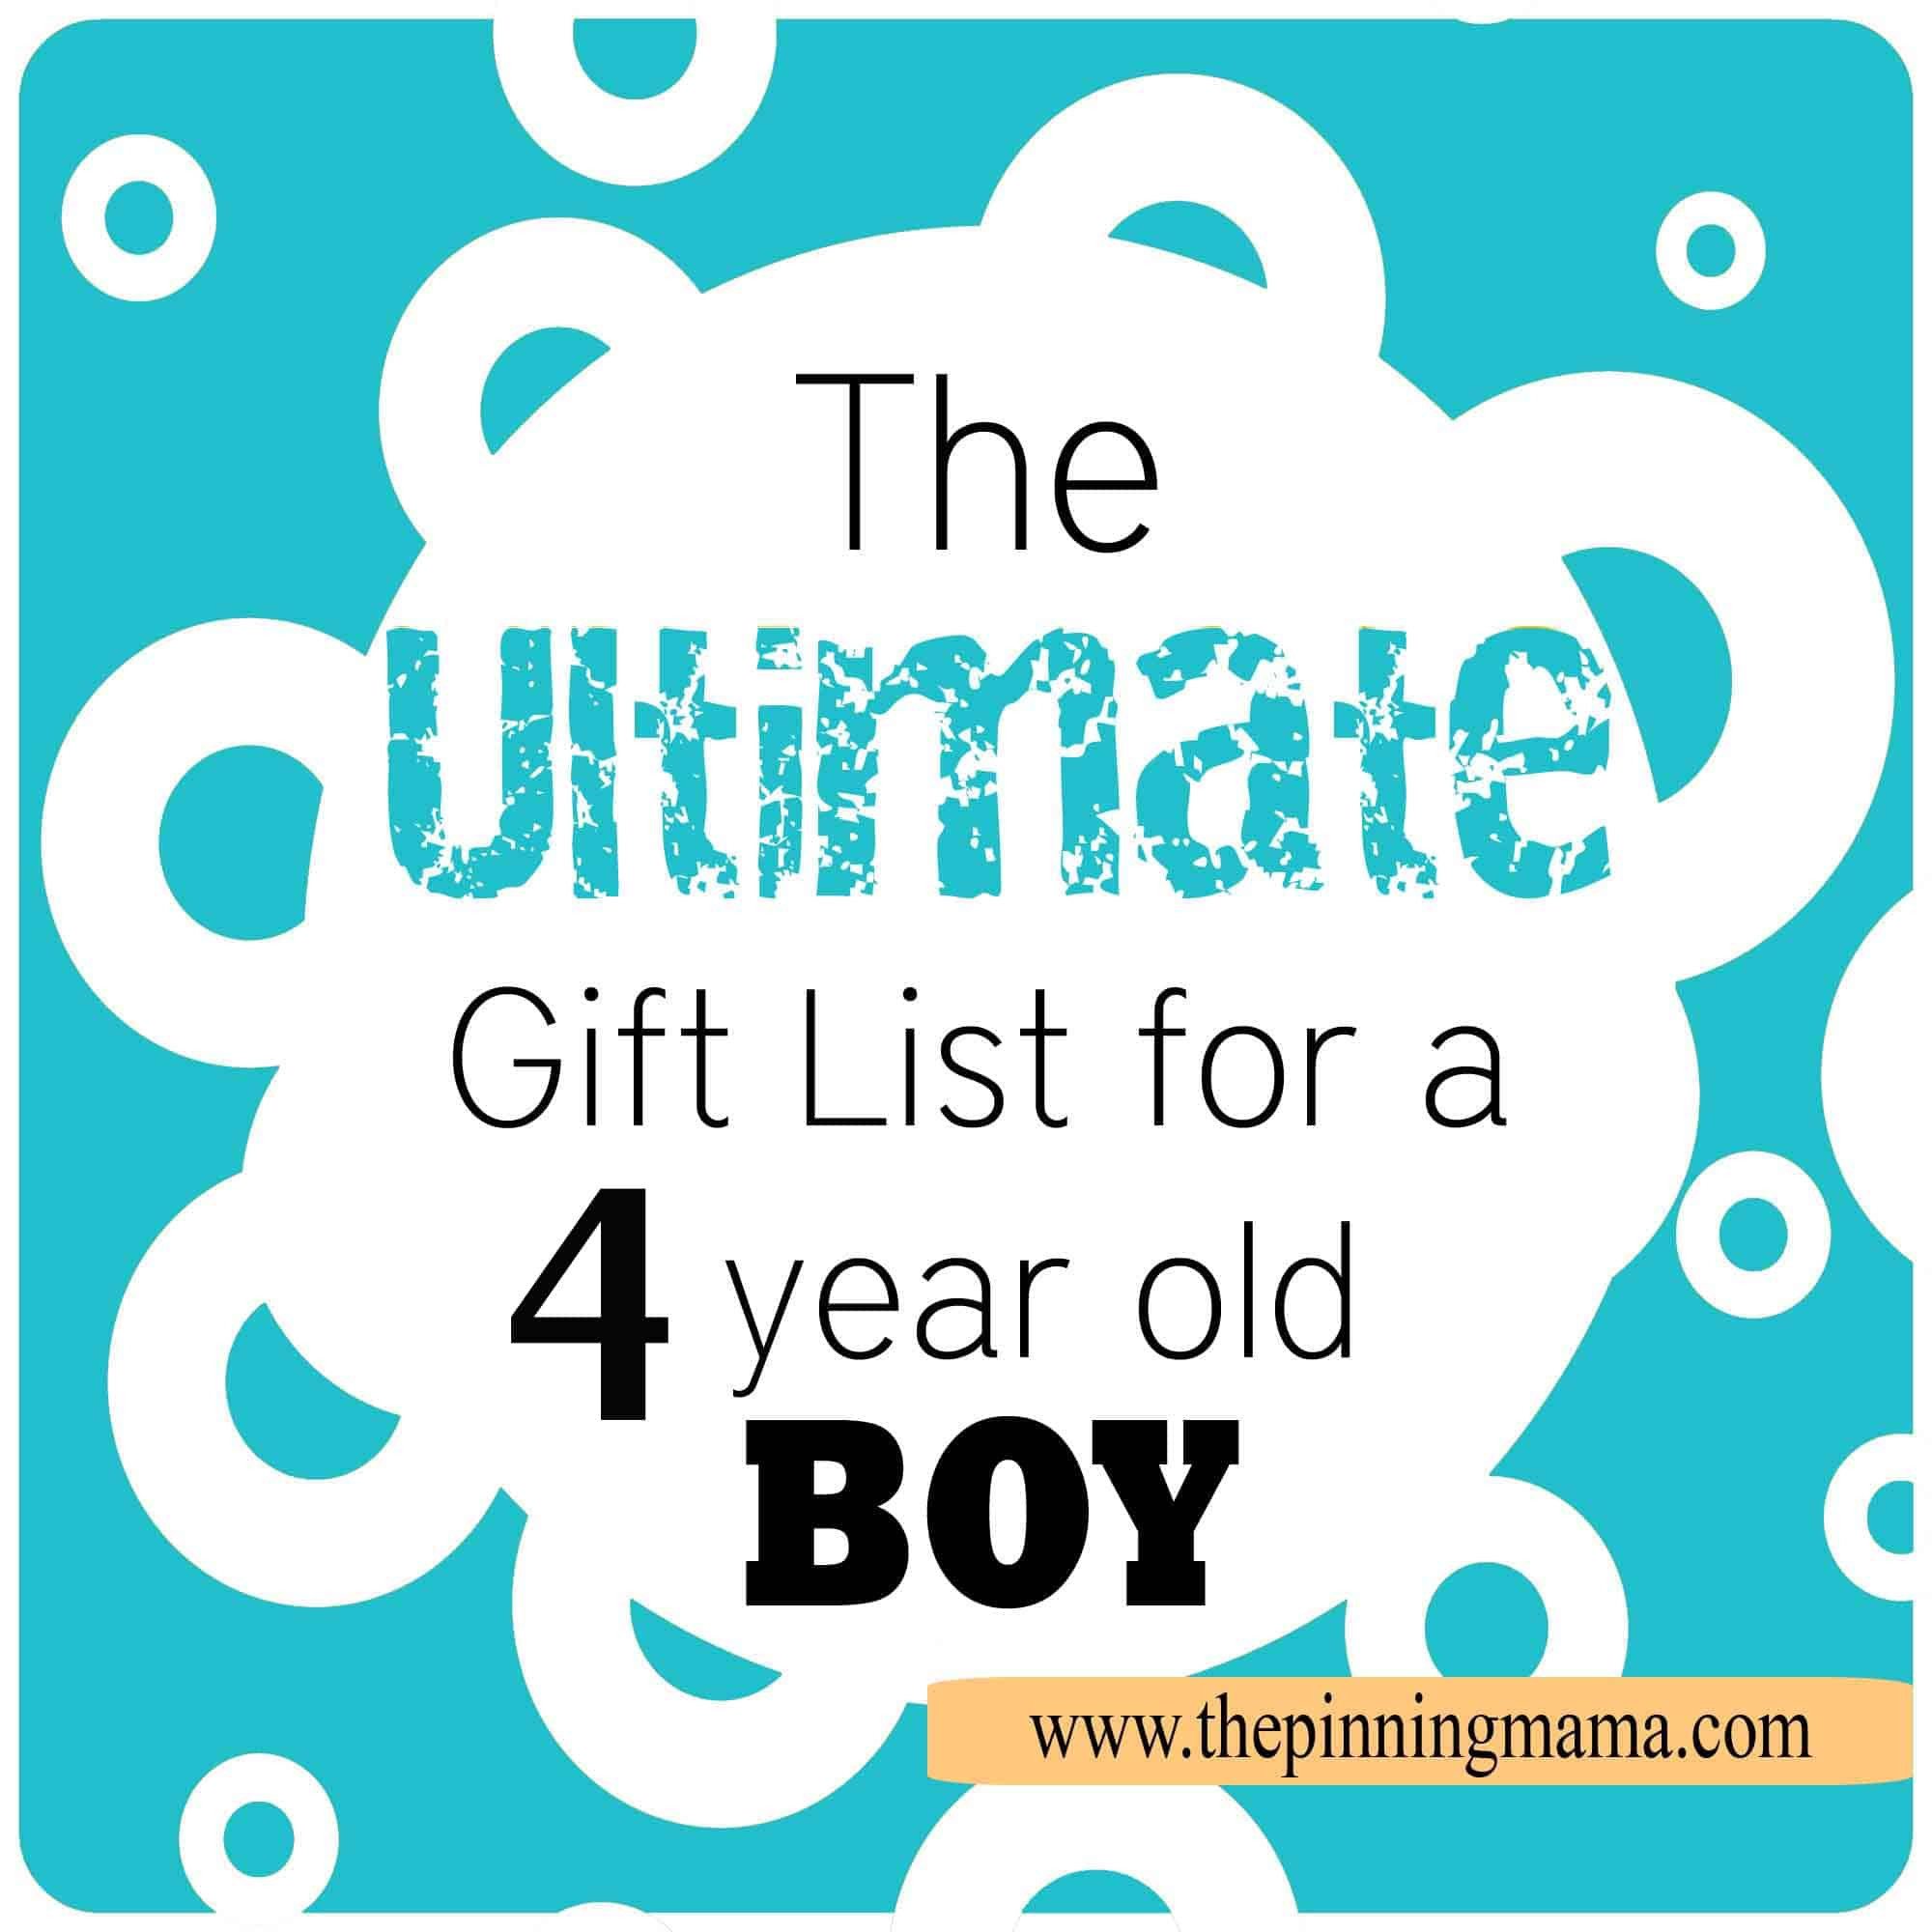 4 Year Old Boy Birthday Gift Ideas
 The Best Gift Ideas for a 4 Year Old Boy